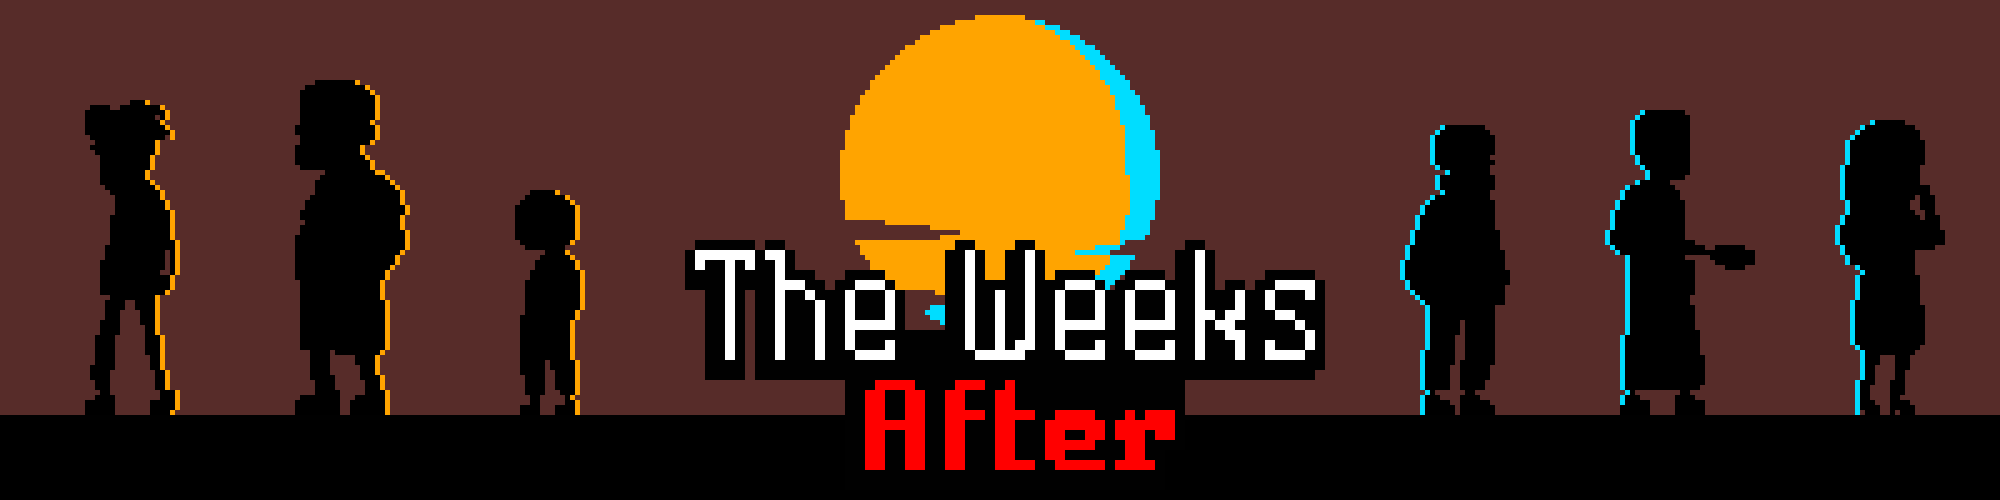 The Weeks After